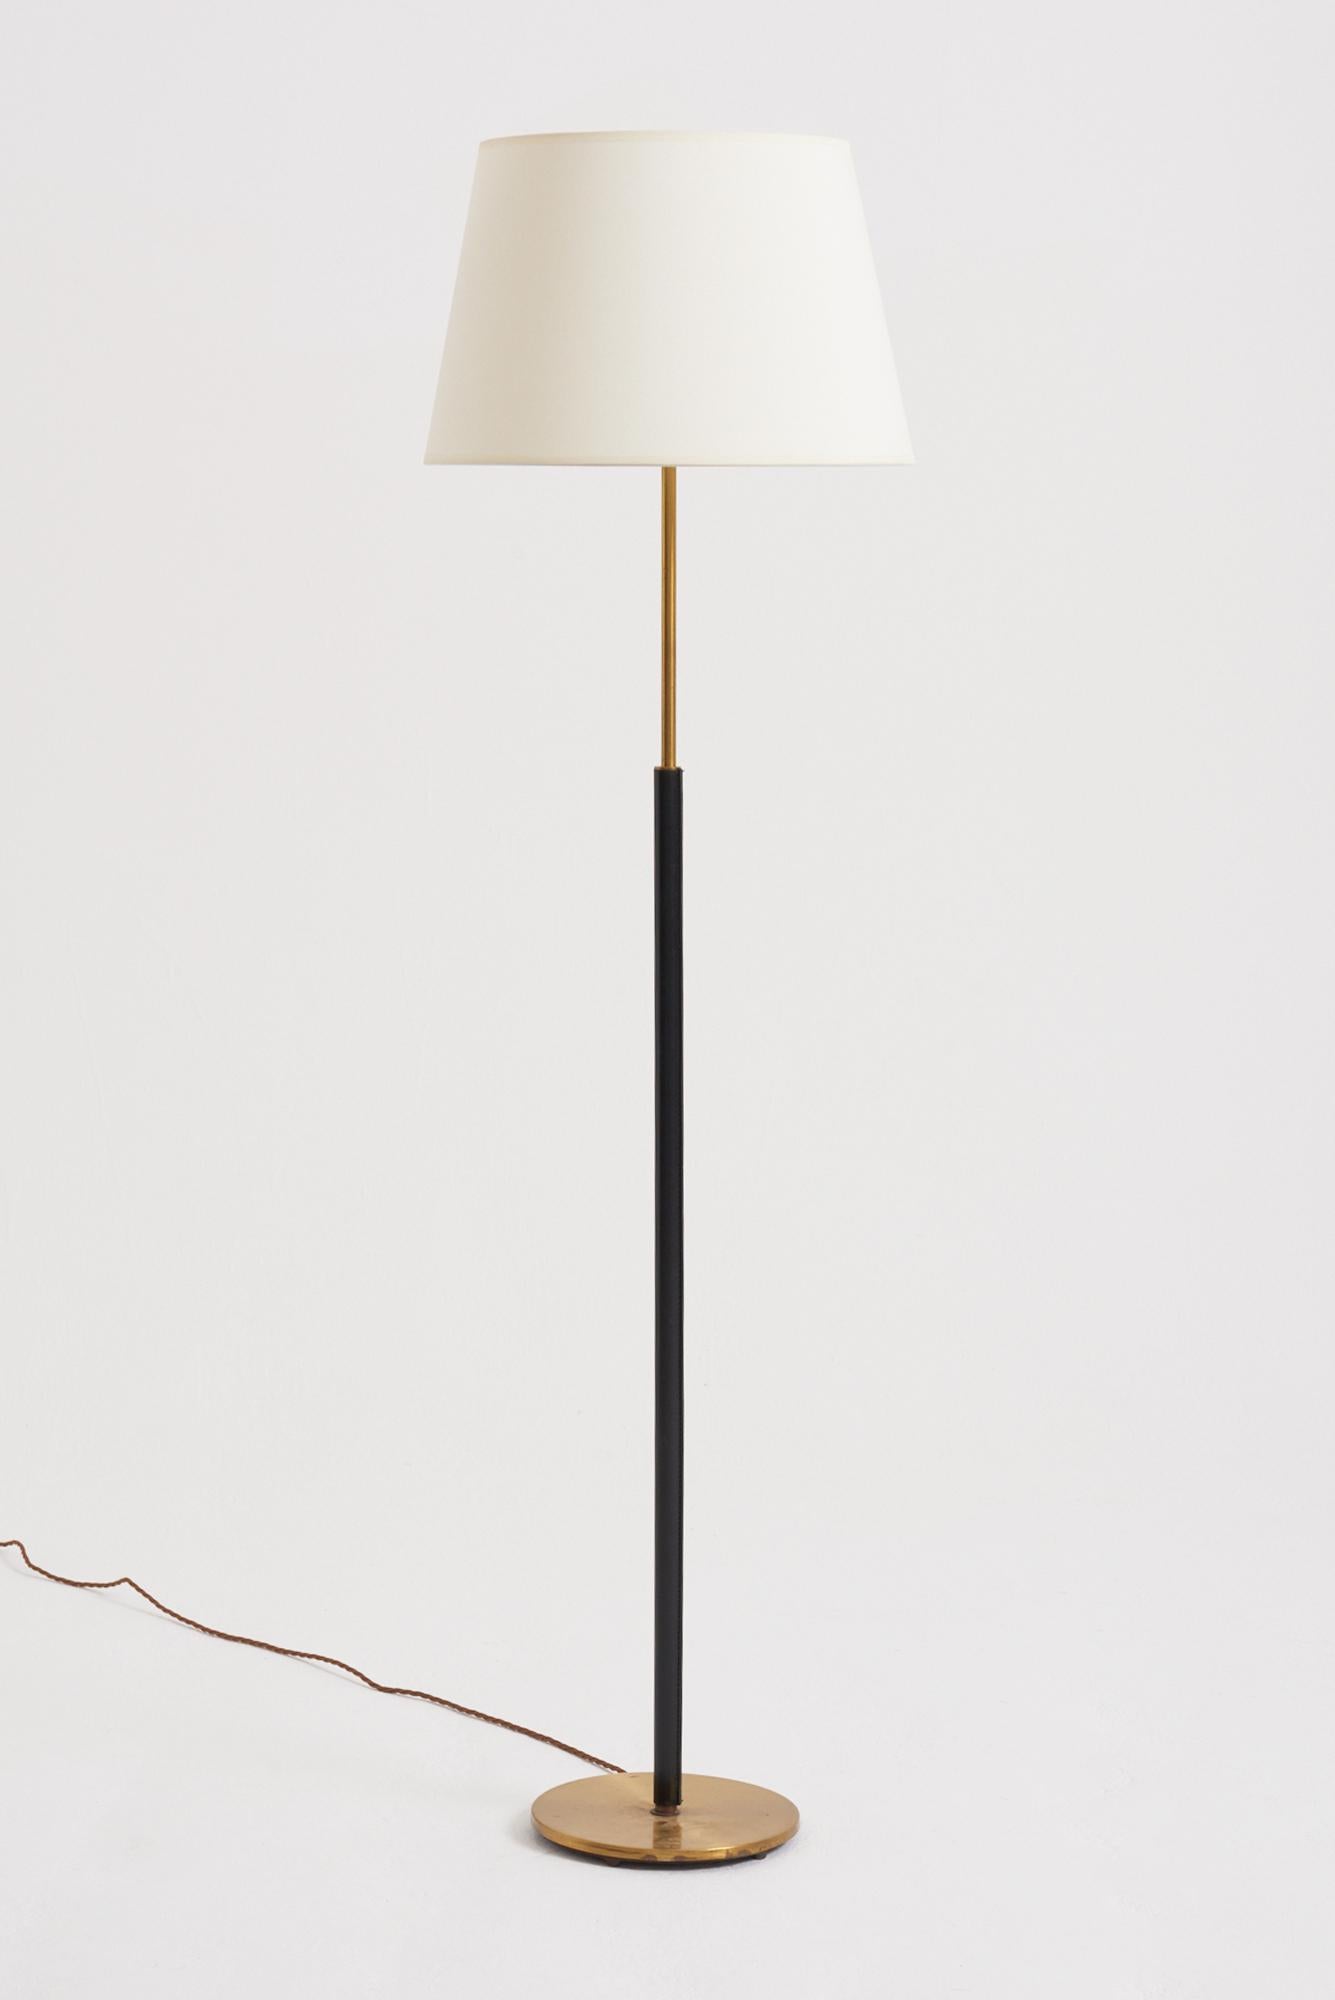 A brass and faux black leather floor lamp by Falkenbergs Belysning. 
Sweden, third quarter of the 20th Century
With the shade: 144 cm high by 41 cm diameter
Lamp base only: 126 cm high by 23 cm diameter